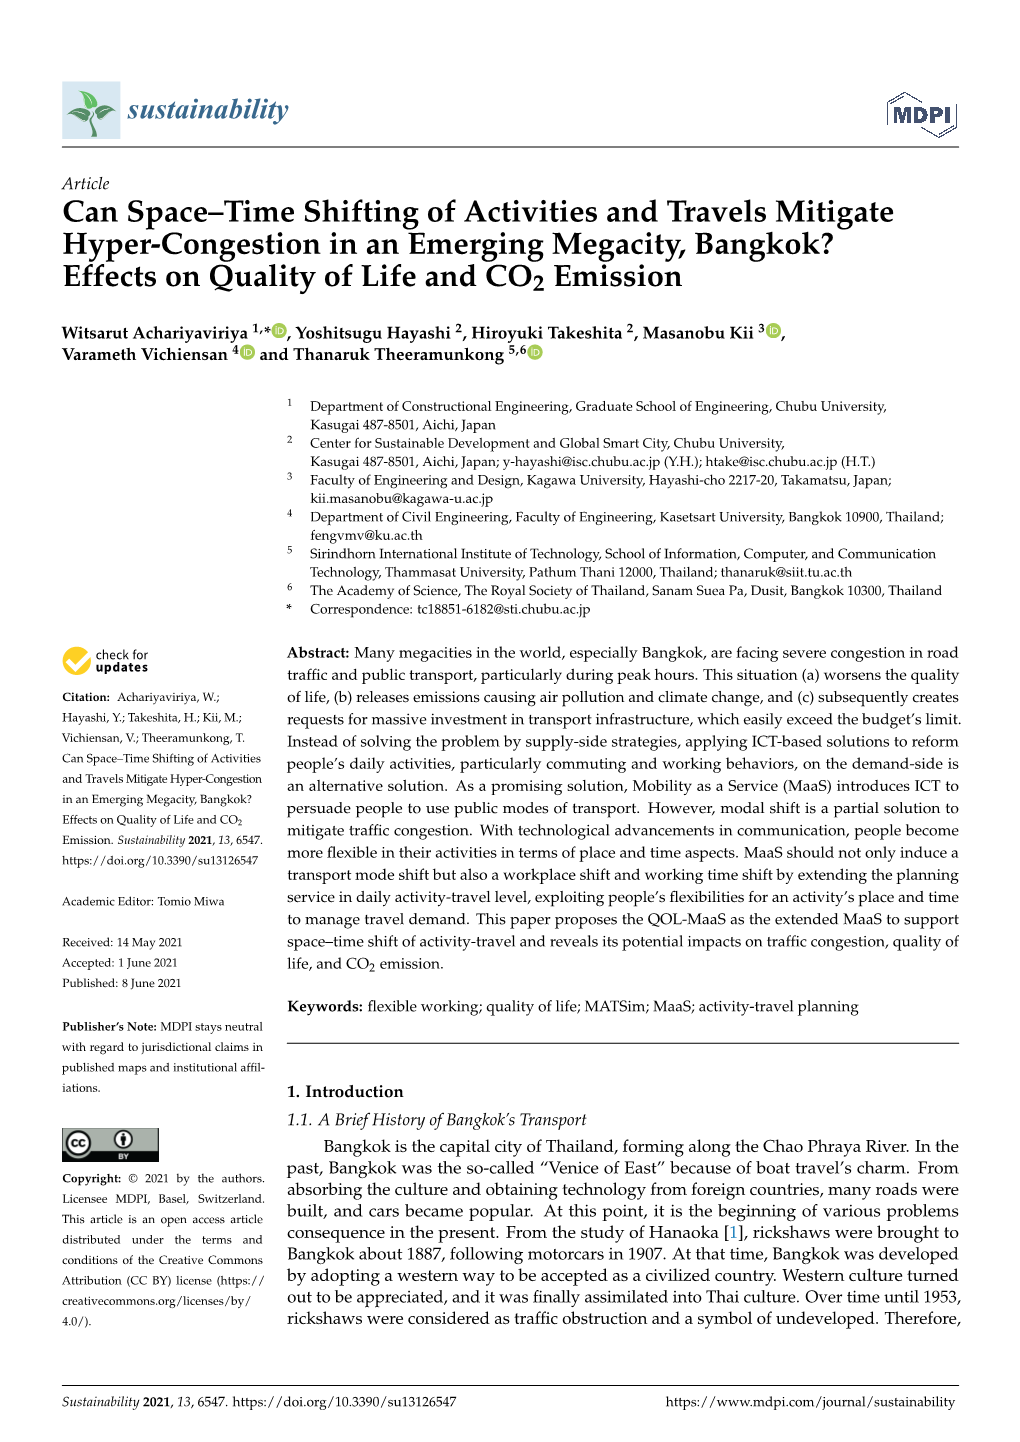 Can Space–Time Shifting of Activities and Travels Mitigate Hyper-Congestion in an Emerging Megacity, Bangkok? Effects on Quality of Life and CO2 Emission